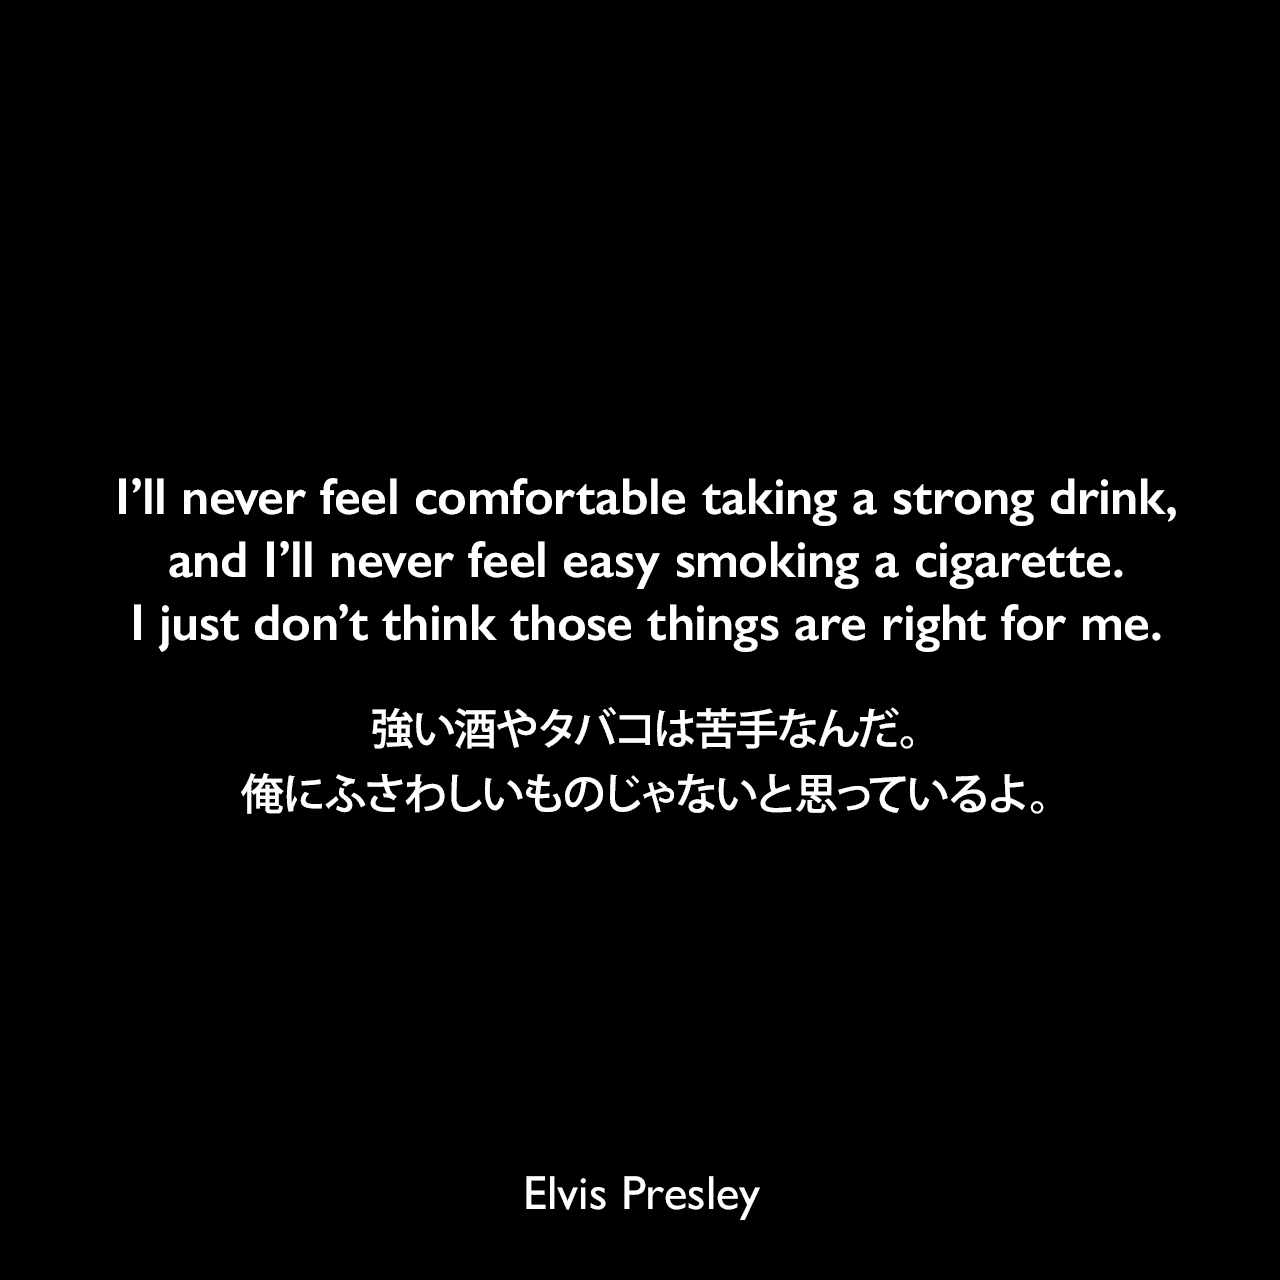 I’ll never feel comfortable taking a strong drink, and I’ll never feel easy smoking a cigarette. I just don’t think those things are right for me.強い酒やタバコは苦手なんだ。俺にふさわしいものじゃないと思っているよ。Elvis Presley